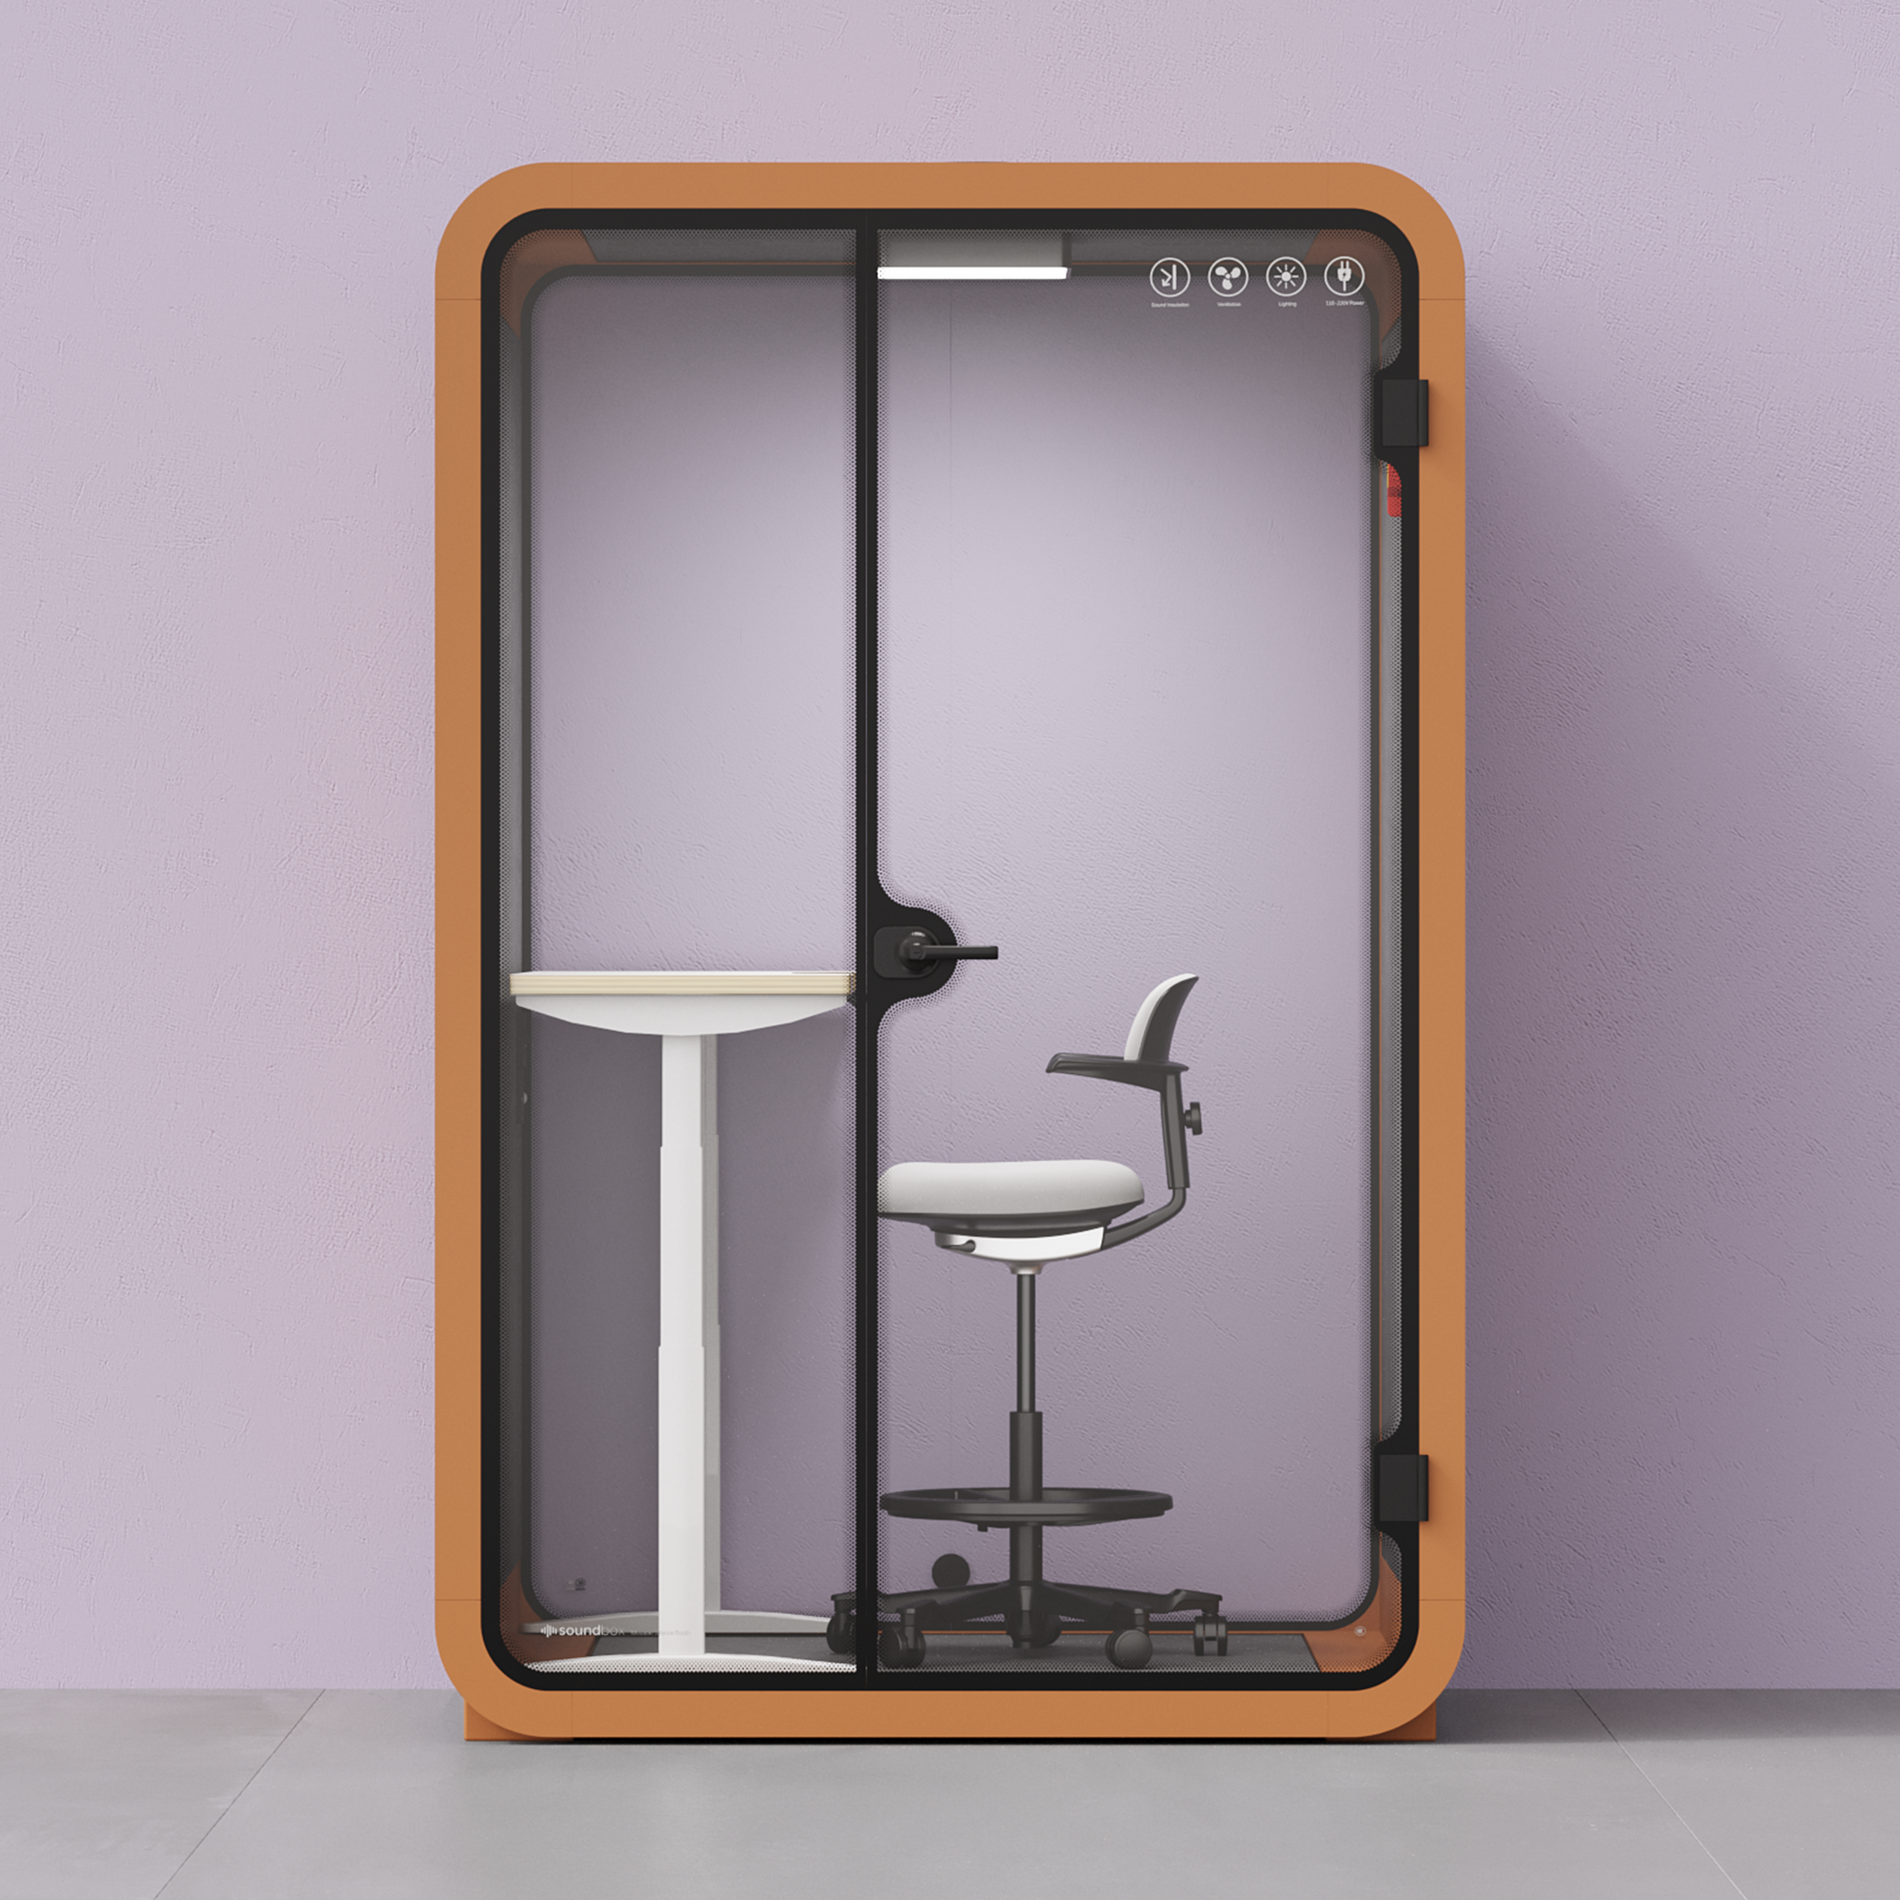 Office Phone Booth Quell - 2 PersonOrange / Dark Gray / Electric Adjustable Work Station + Stool